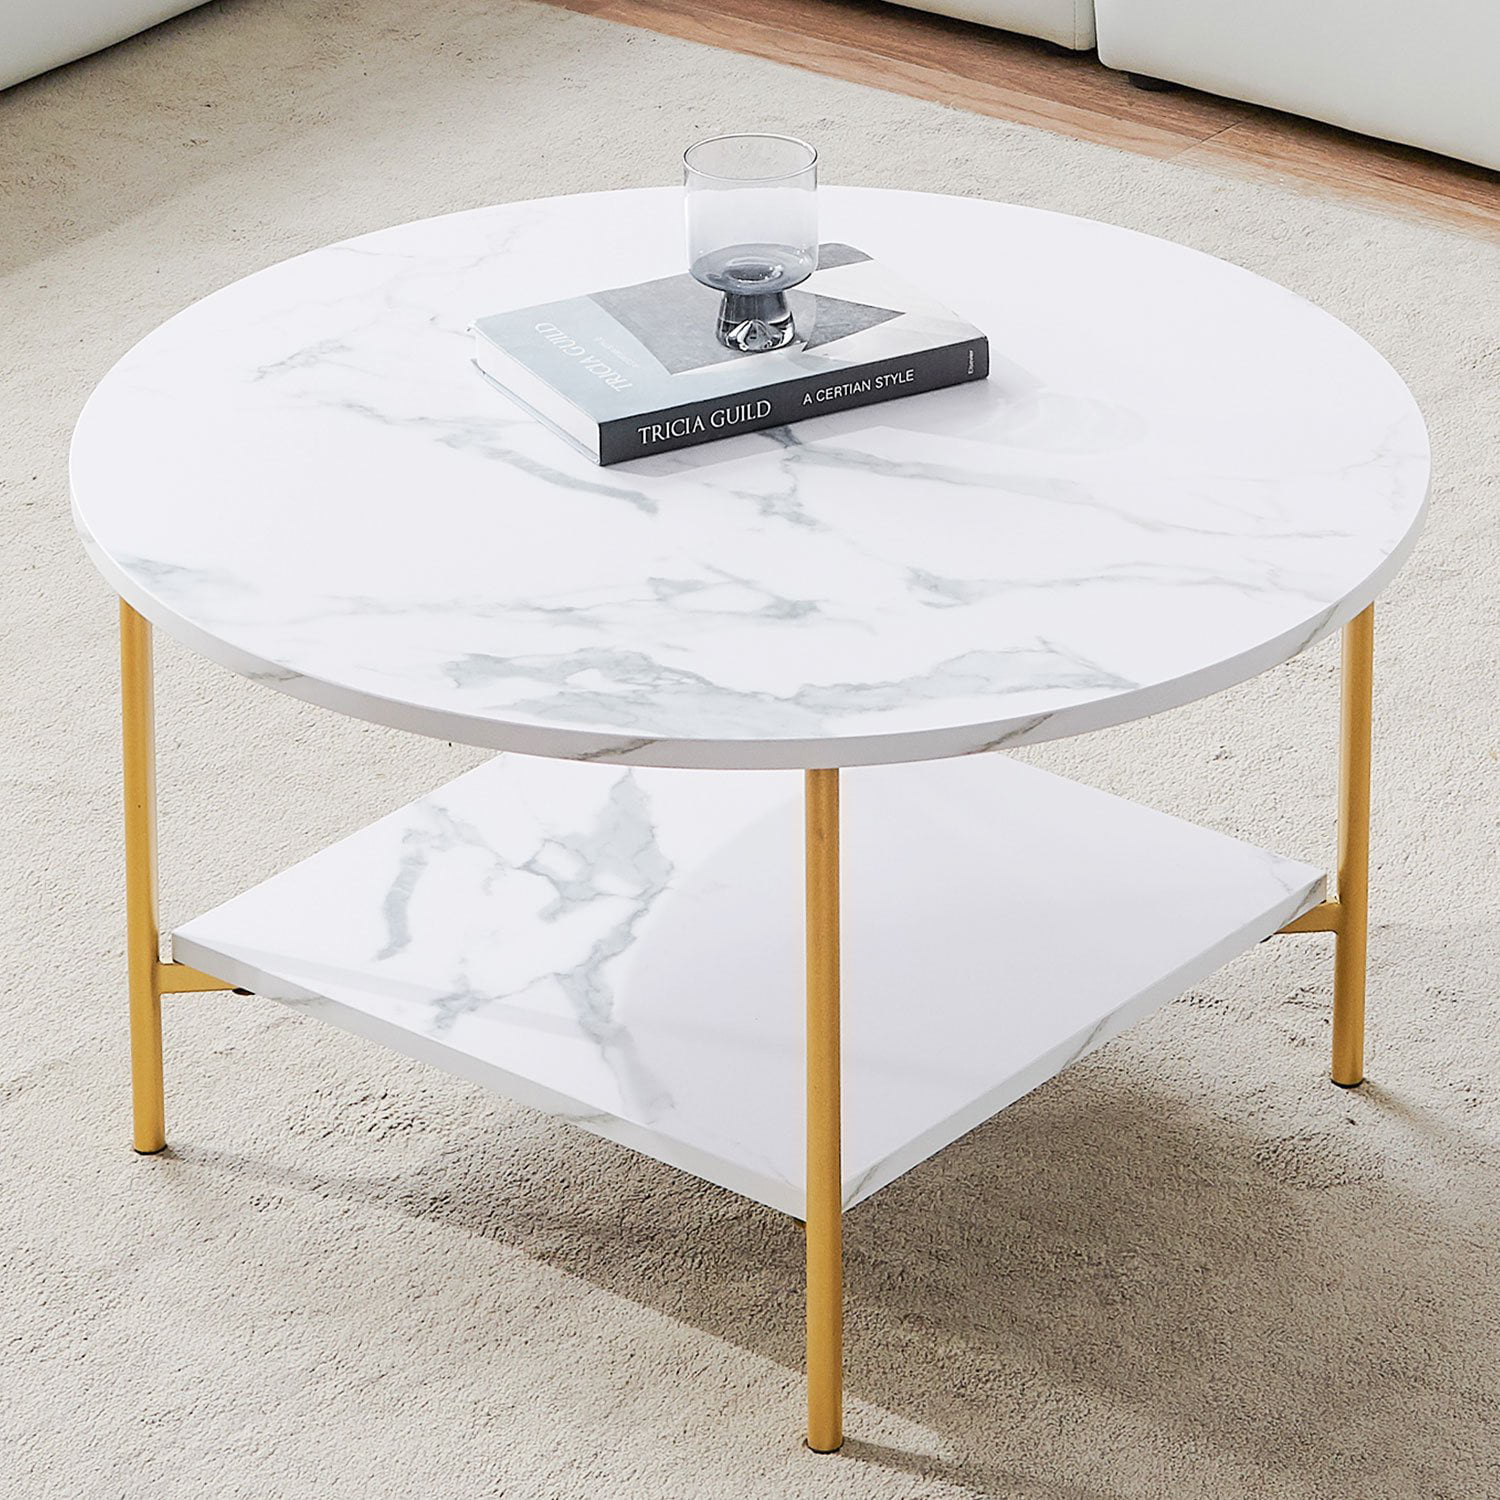 Modern Cocktail Table with Storage Shelf Marble Coffee Tables for Living Room Faux Marble/32 Inch 2 Tier Living Room Center Table Gold Metal Legs